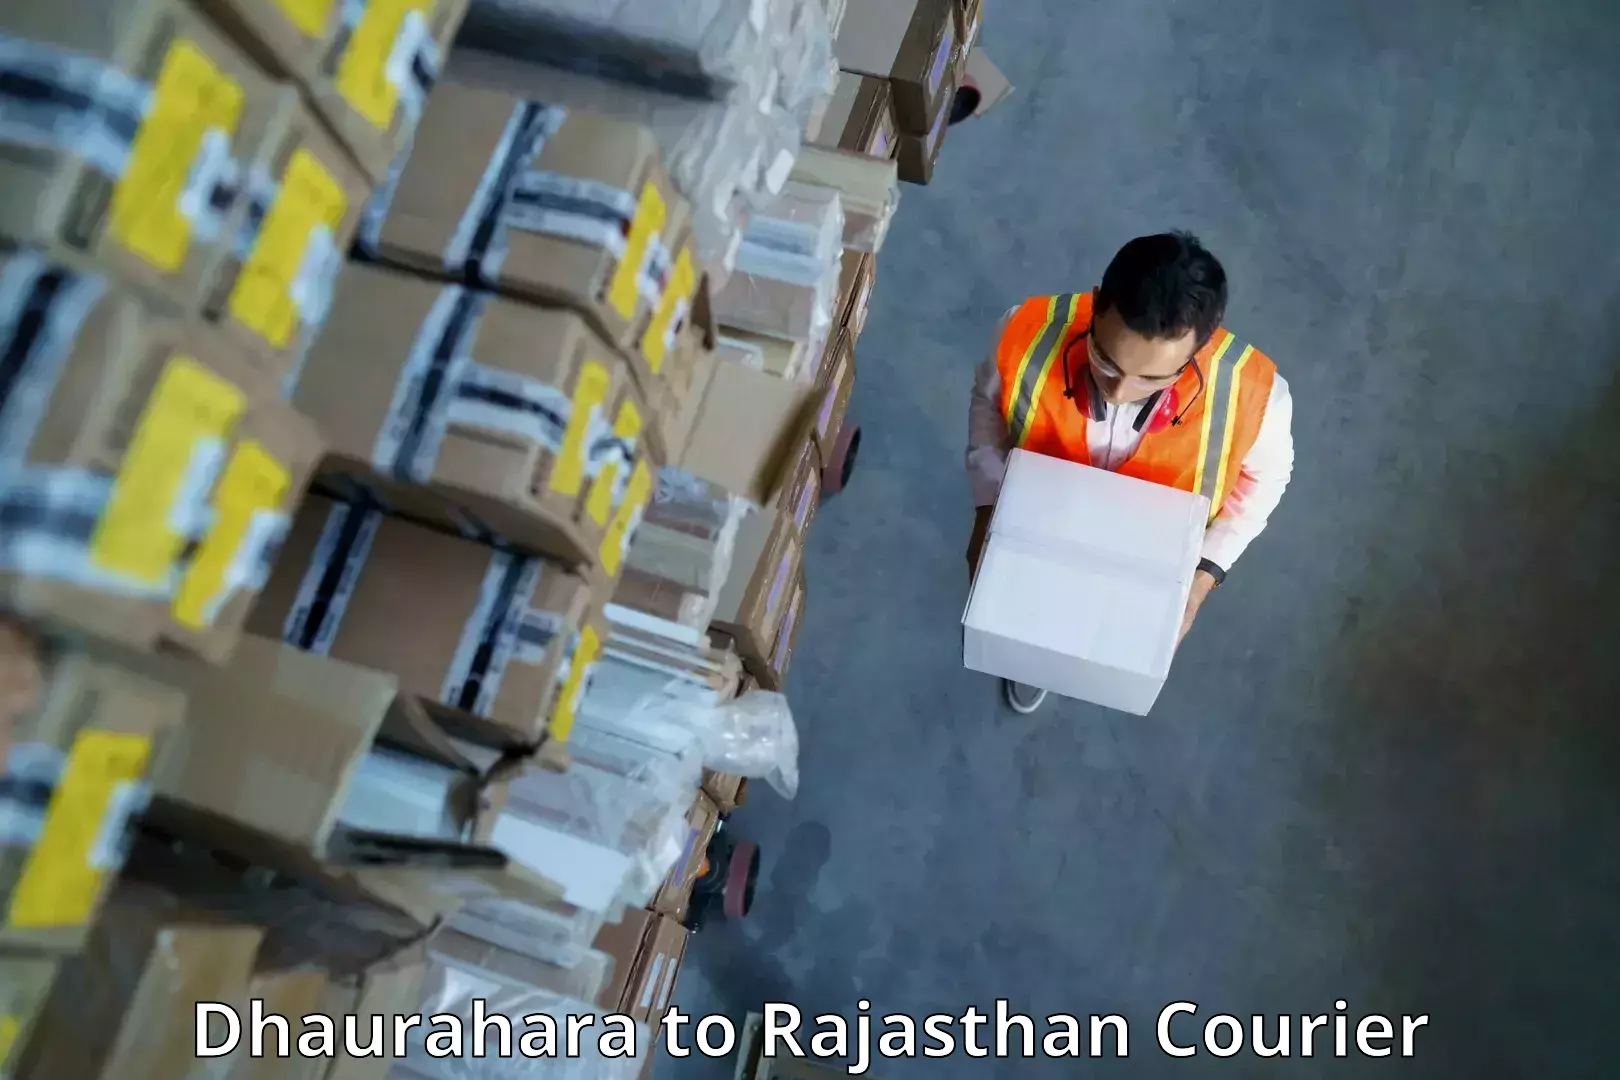 Courier app Dhaurahara to Rajasthan